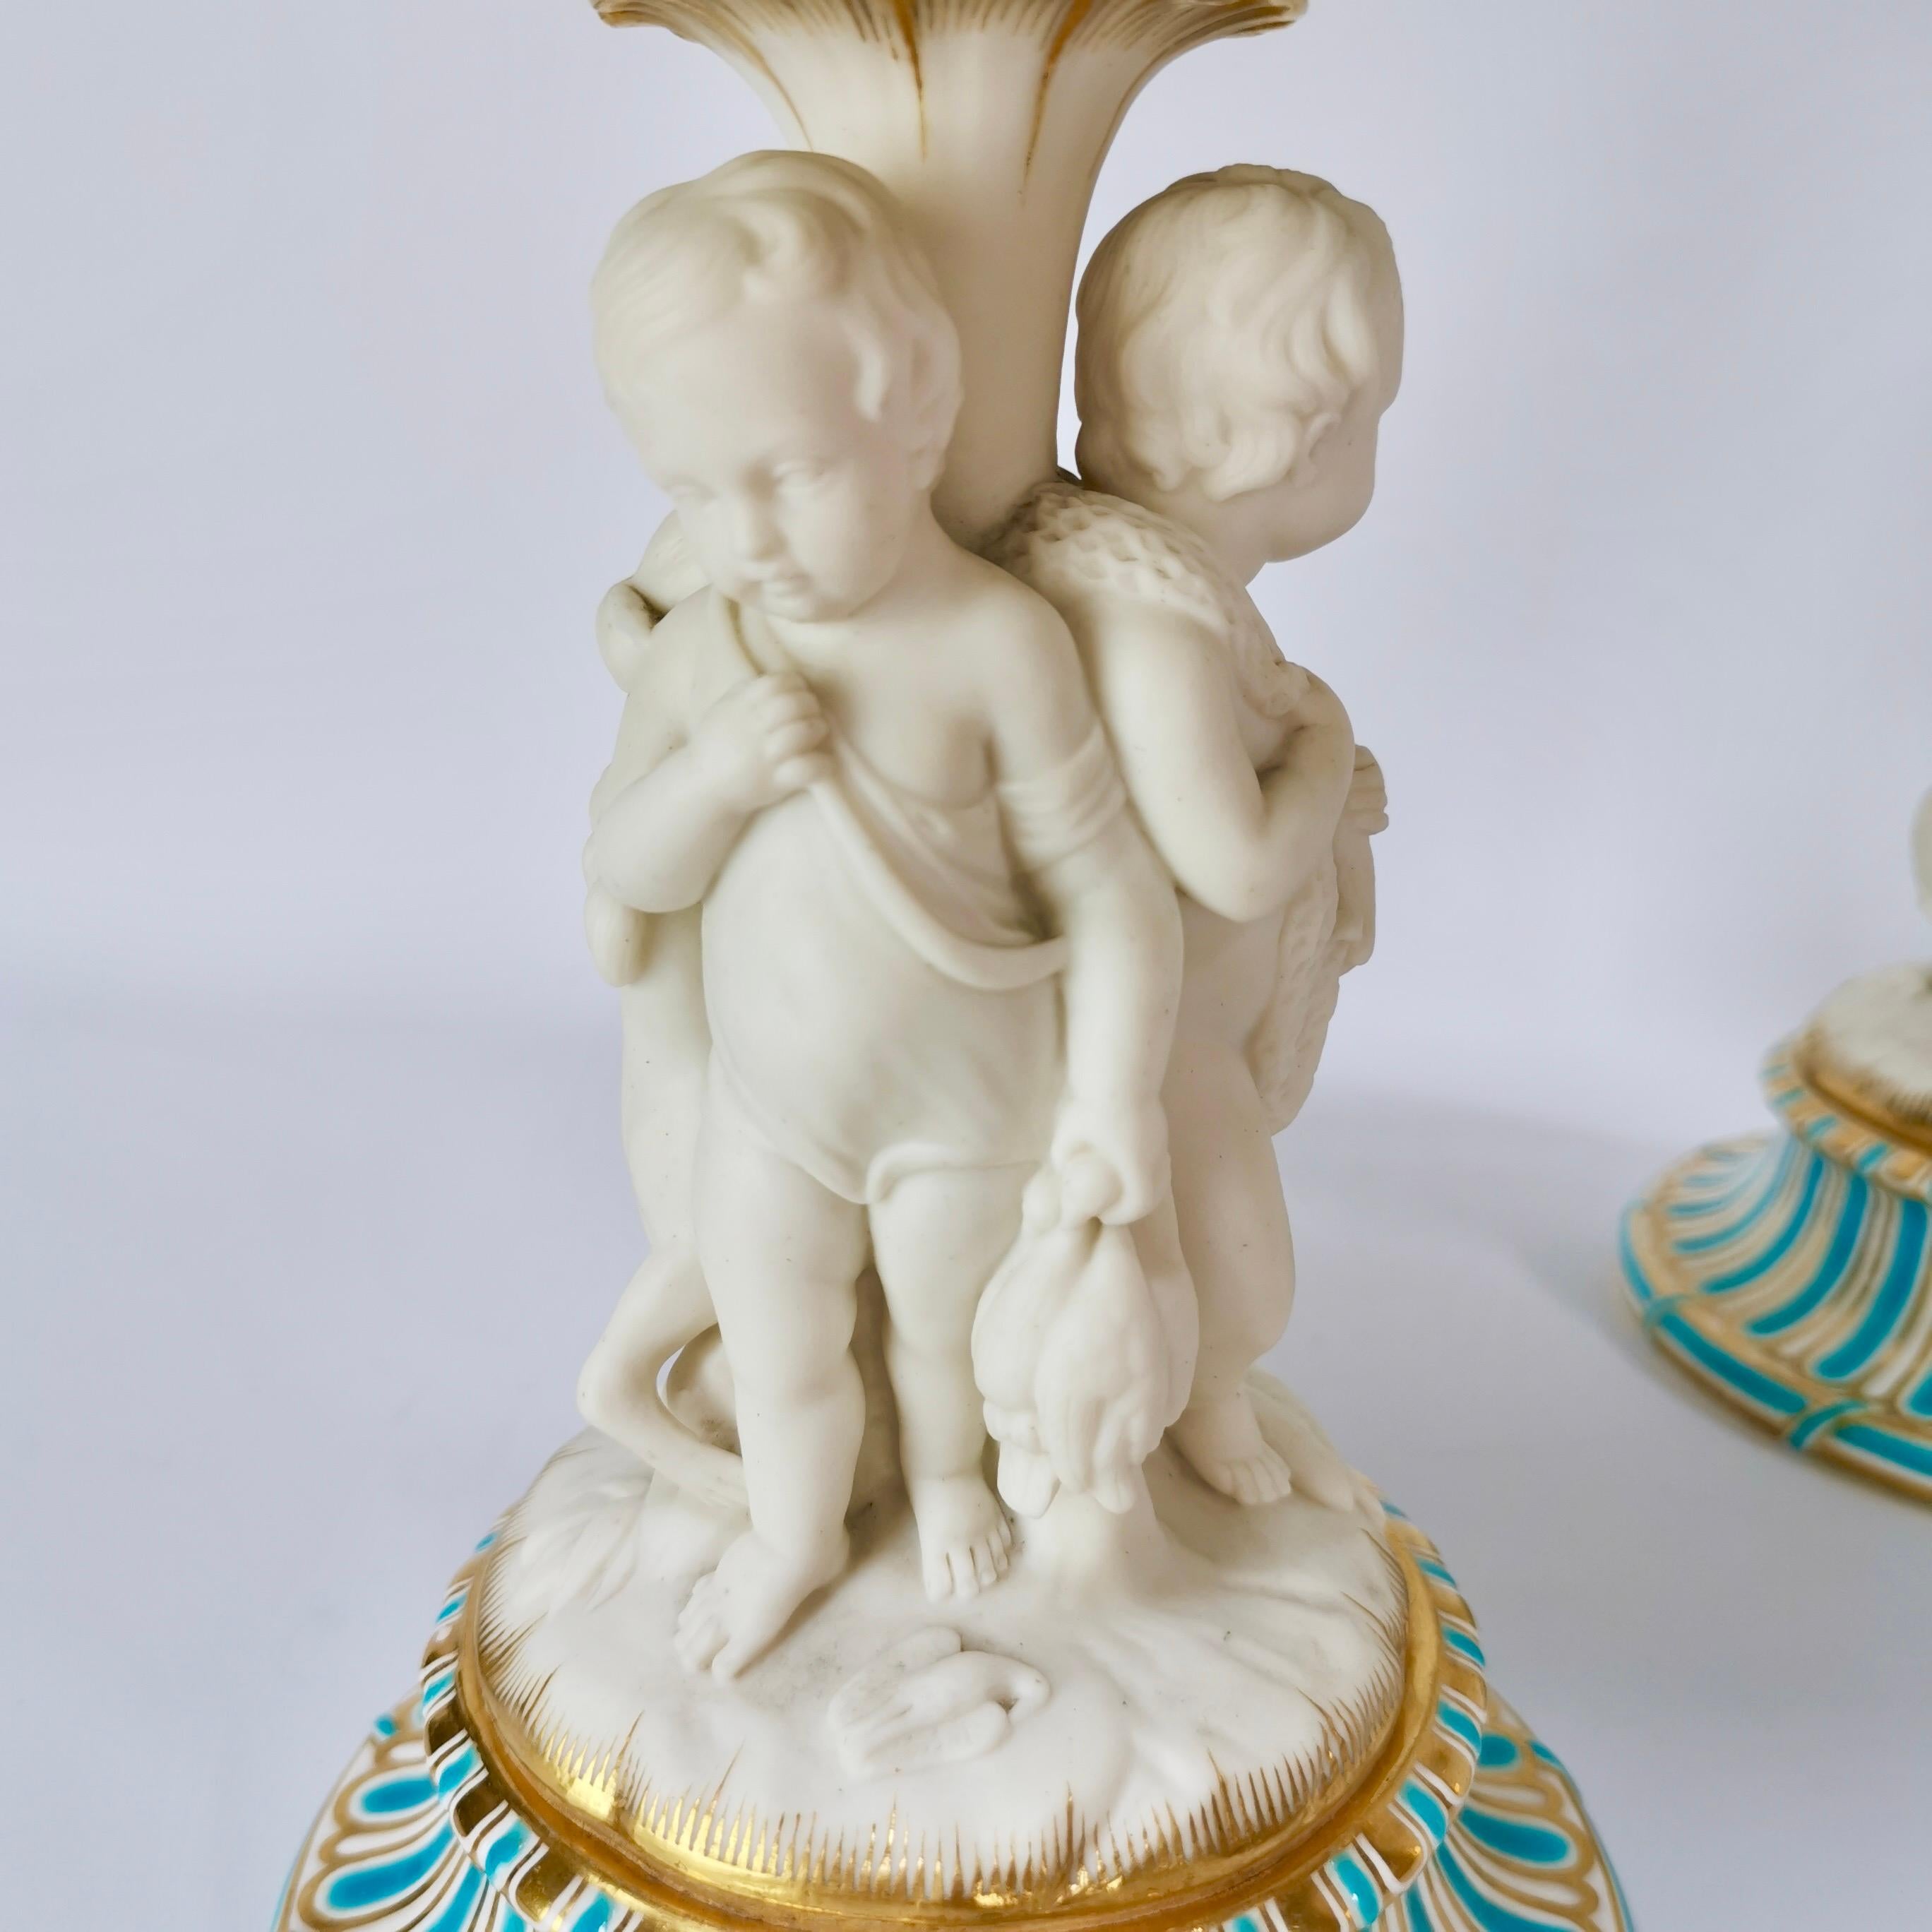 Molded Minton Pair of Tazzas, White Parian Porcelain Cherubs Hunting, Victorian ca 1880 For Sale